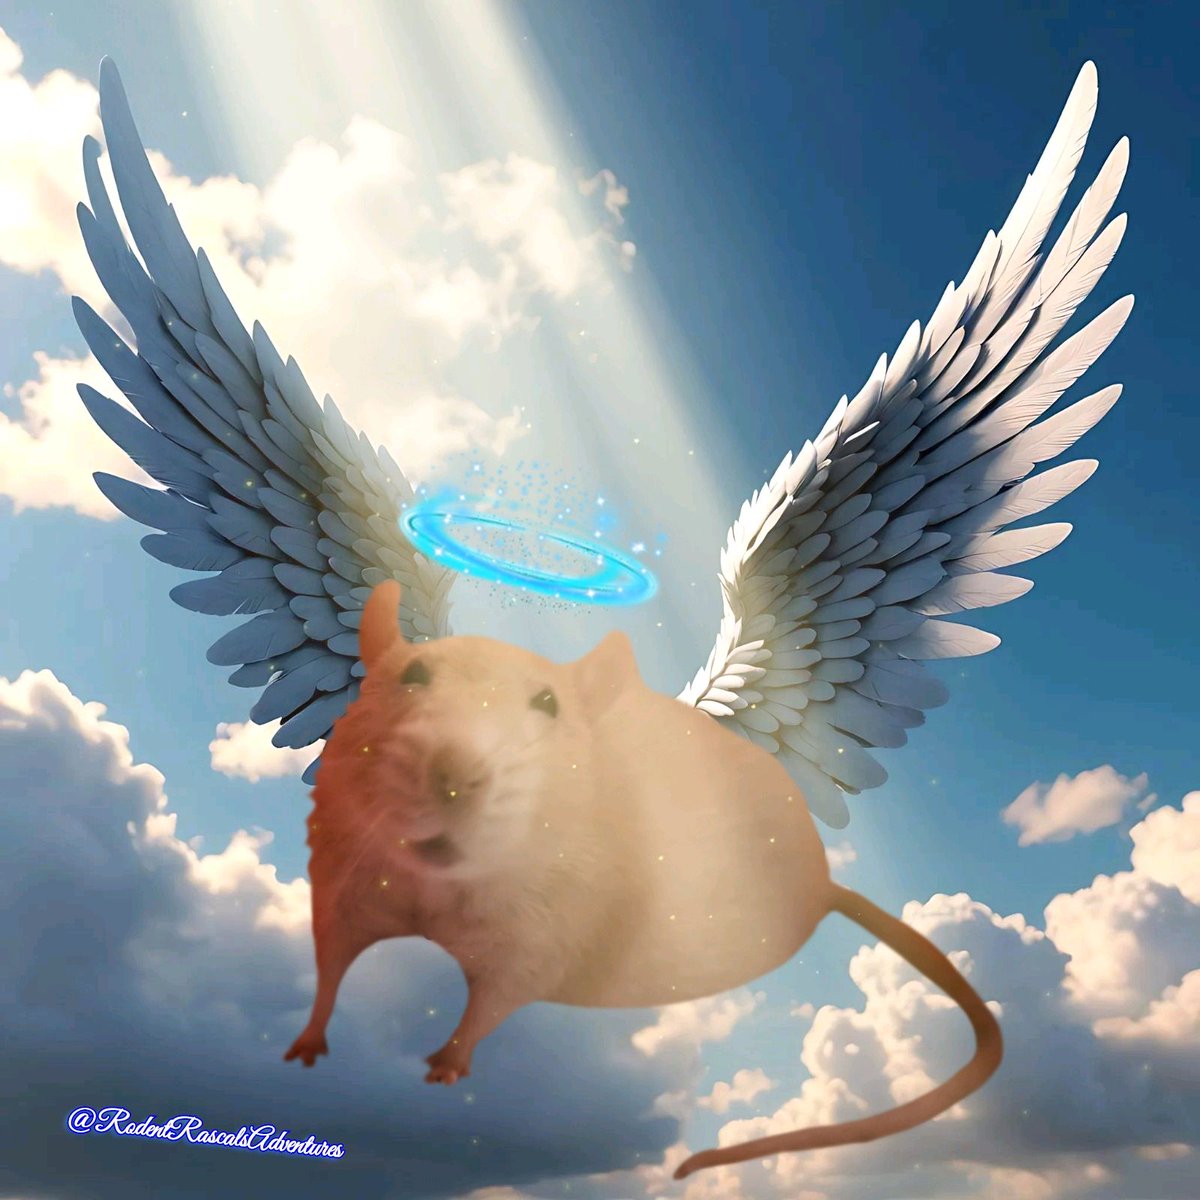 🐁🪽 #FlyHigh Mr. HoneyBun is living a beautiful afterlife in the sky 🌈 riding down rainbows and enjoying the company of many other Rat Angels... #fancyrat #petrat #ourangel #MondayThoughts #petloss #animalphotography #photooftheday ❤️🐹🐽🐀💻⬇️ #RodentRascalsAdventures